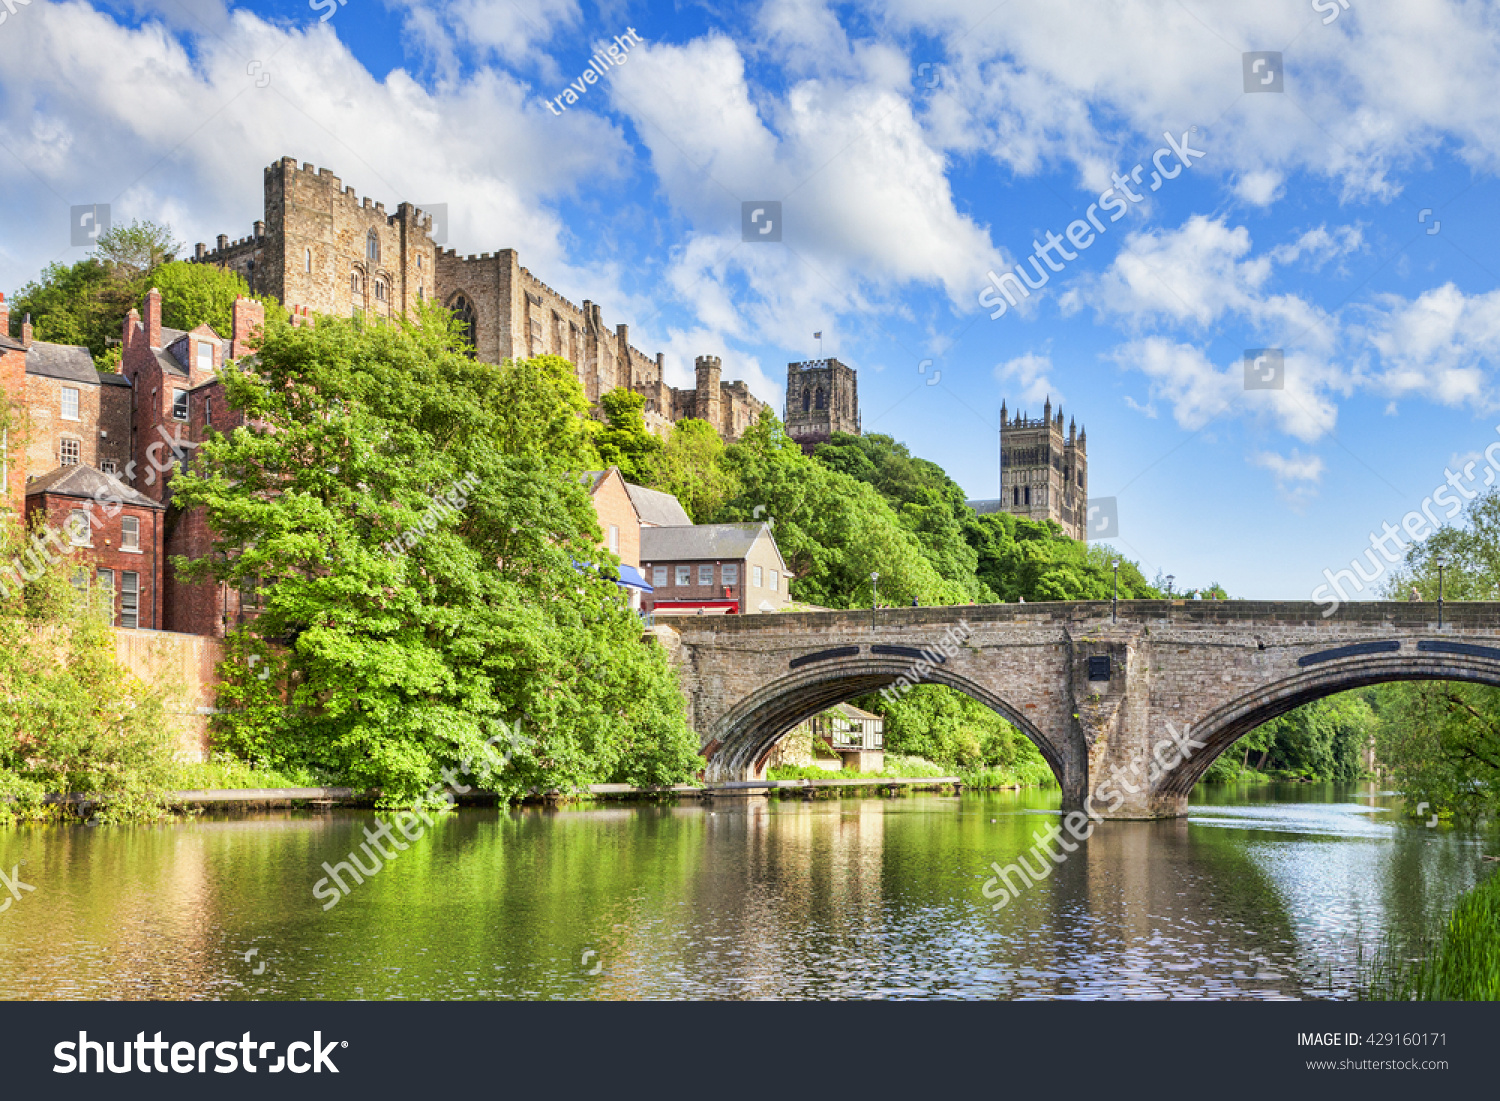 Durham Castle and Cathedral on their rock above the city, and Framwellgate Bridge spanning the River Wear, England, UK #429160171